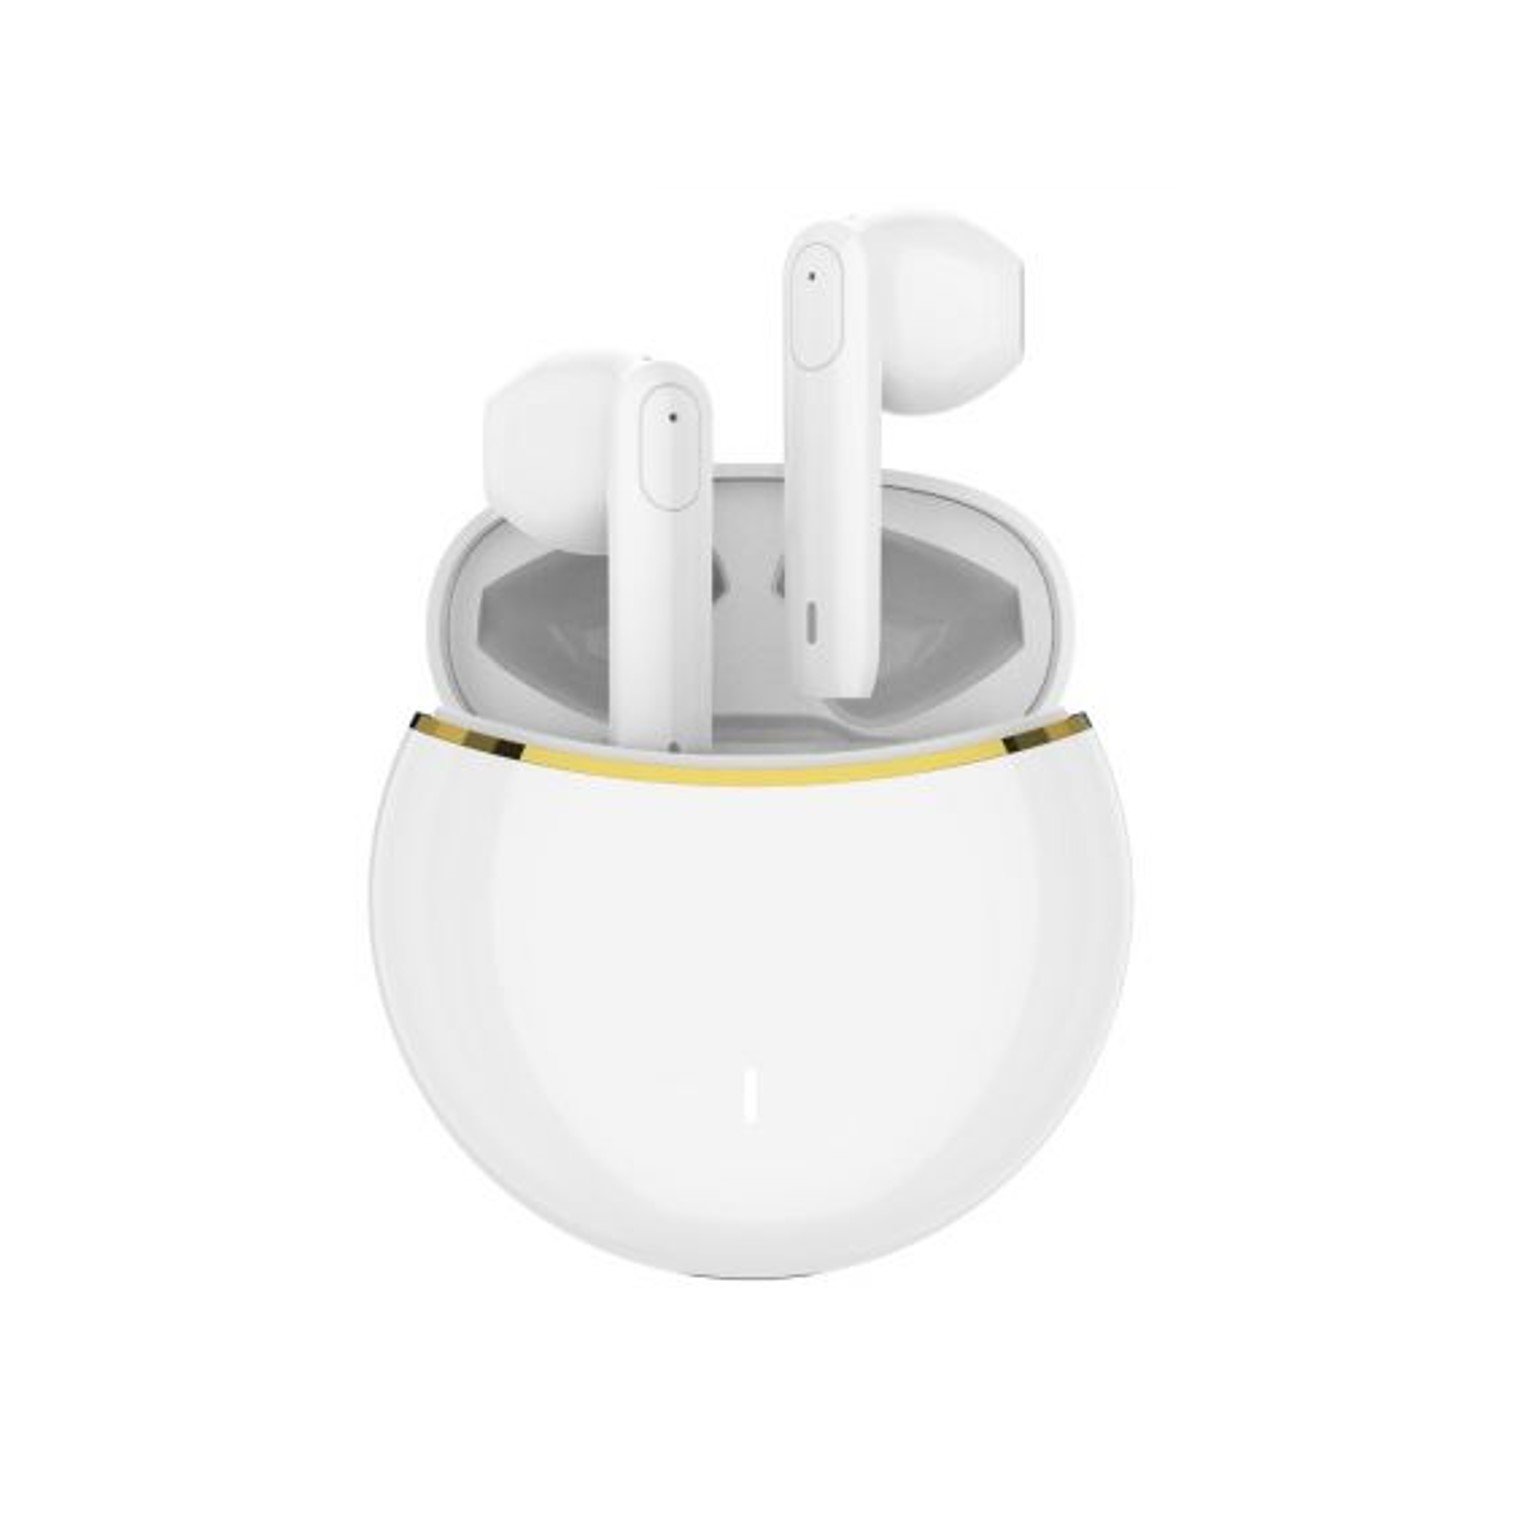 Acer Earbuds FAE-70 Airbuds White